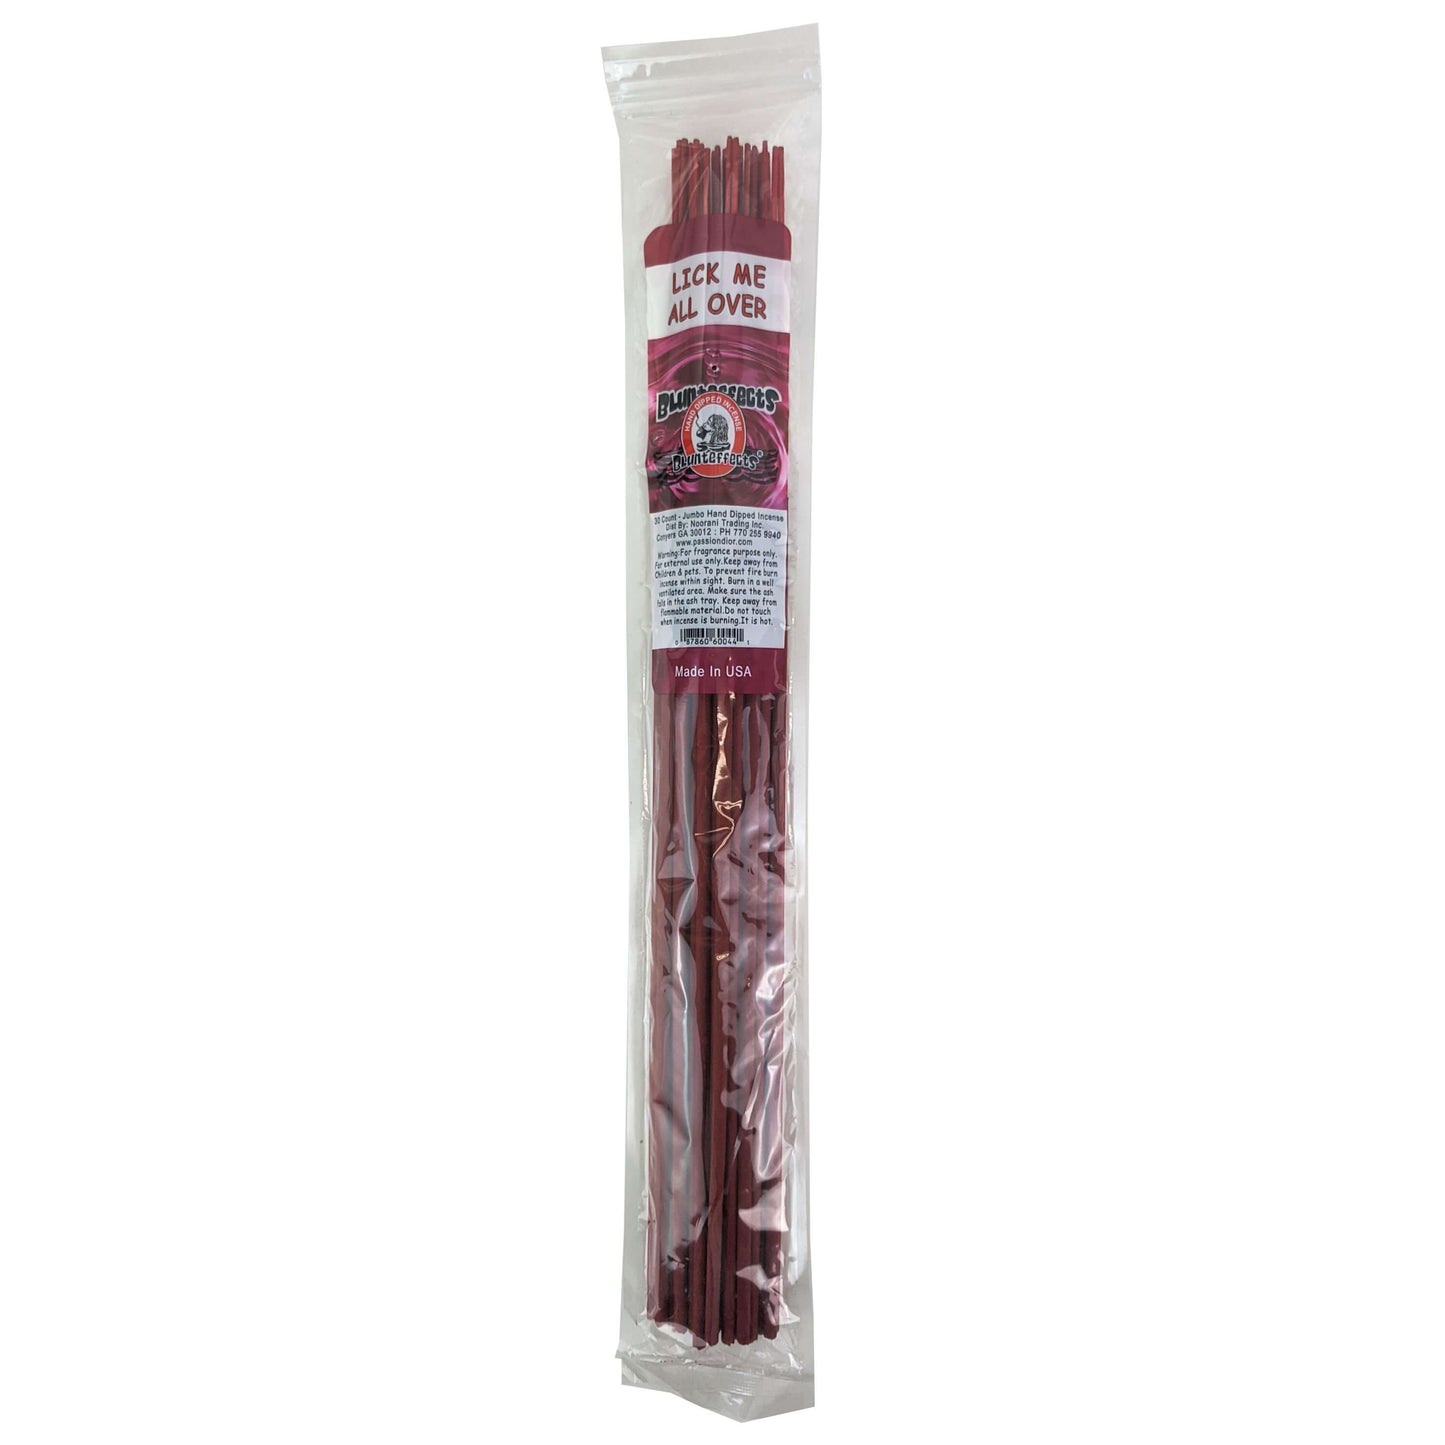 Lick Me All Over Scent, 19" BluntEffects Jumbo Incense